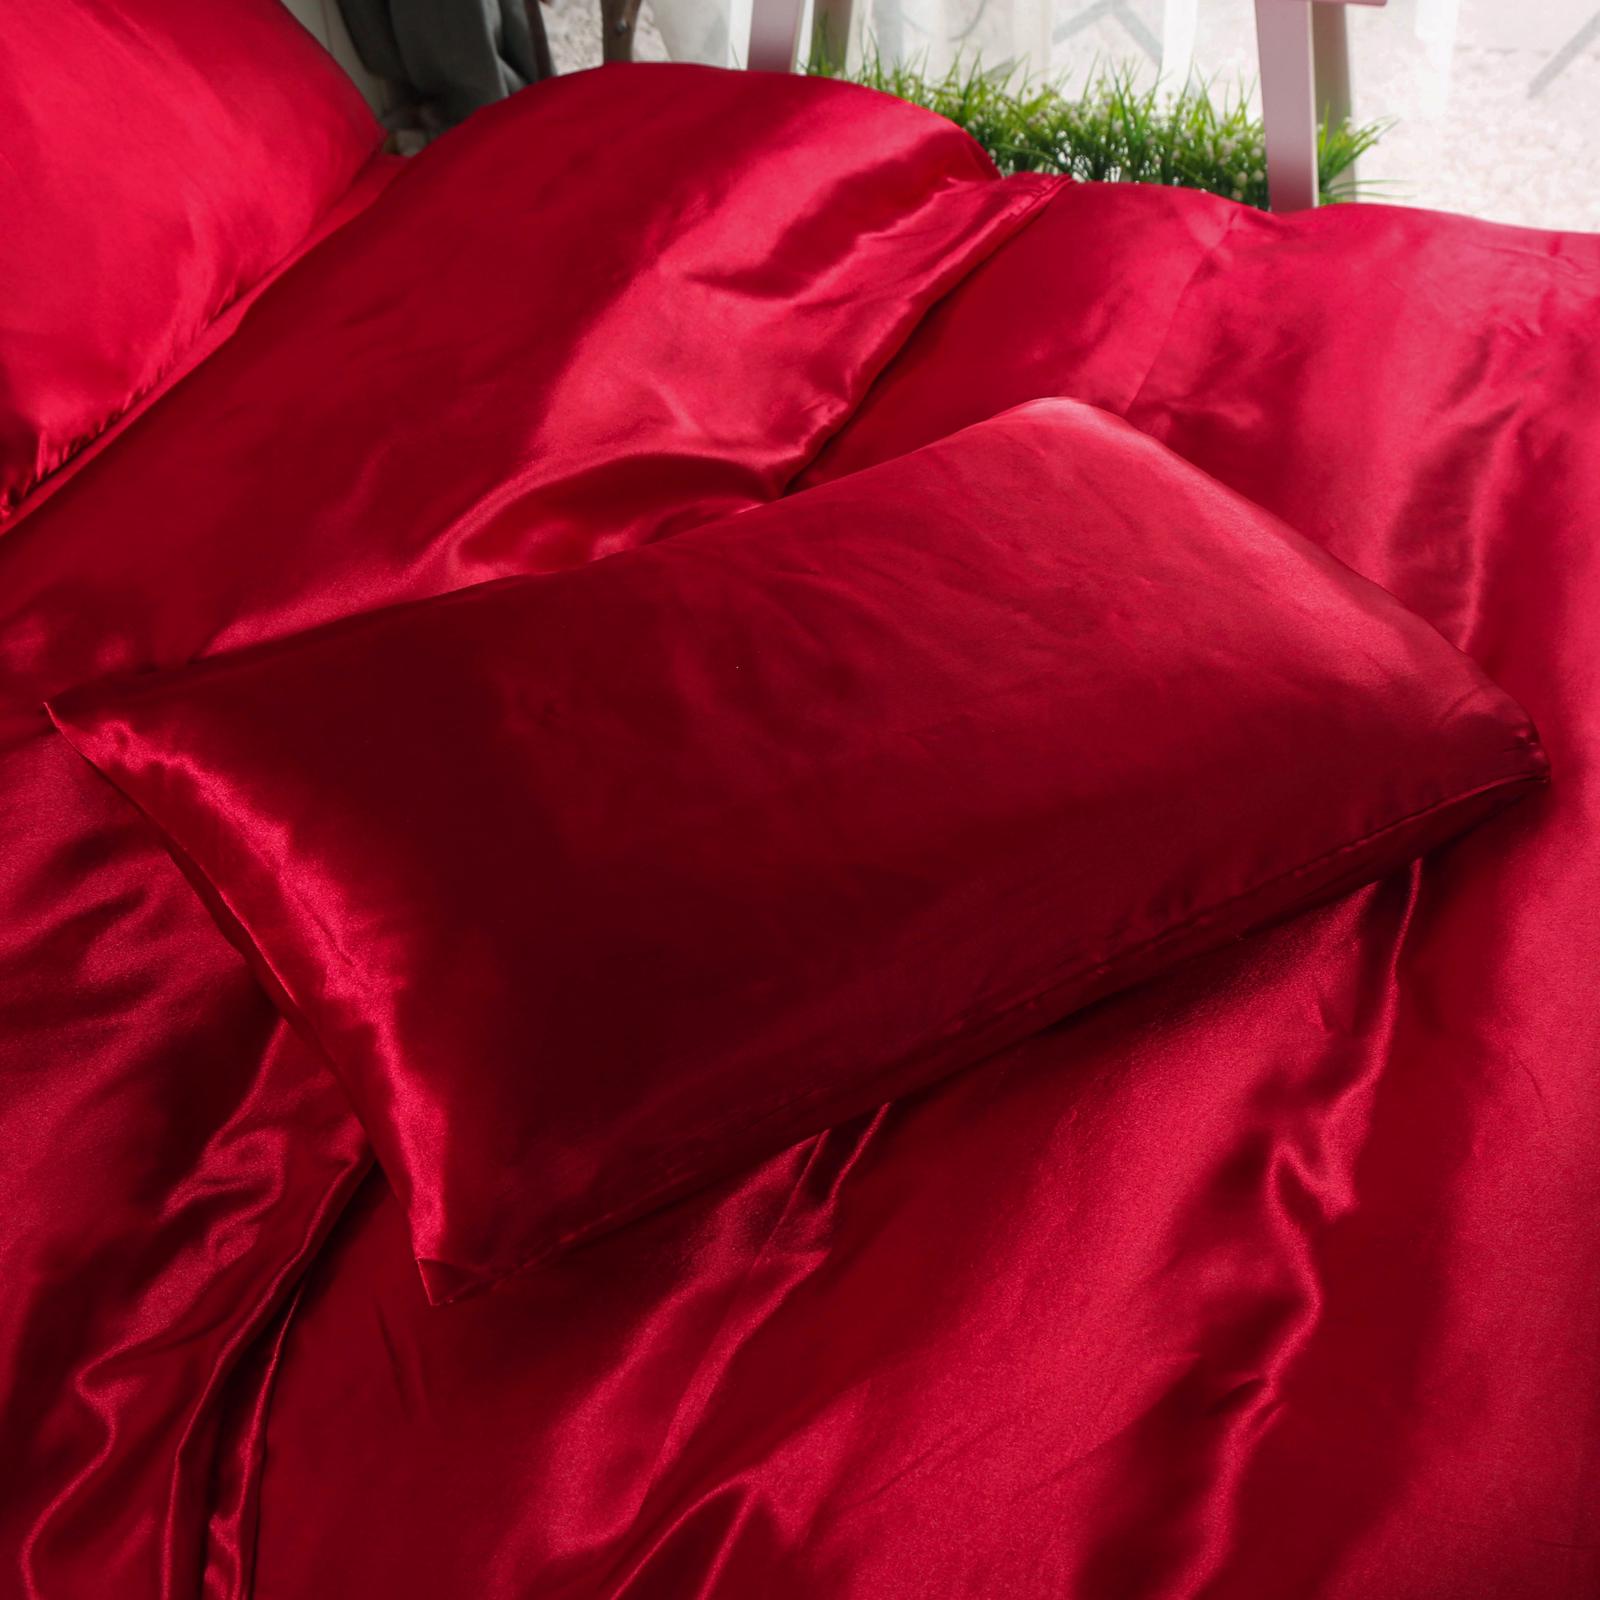 Red 6pc Satin Panel Double Bed Duvet Quilt Cover Set